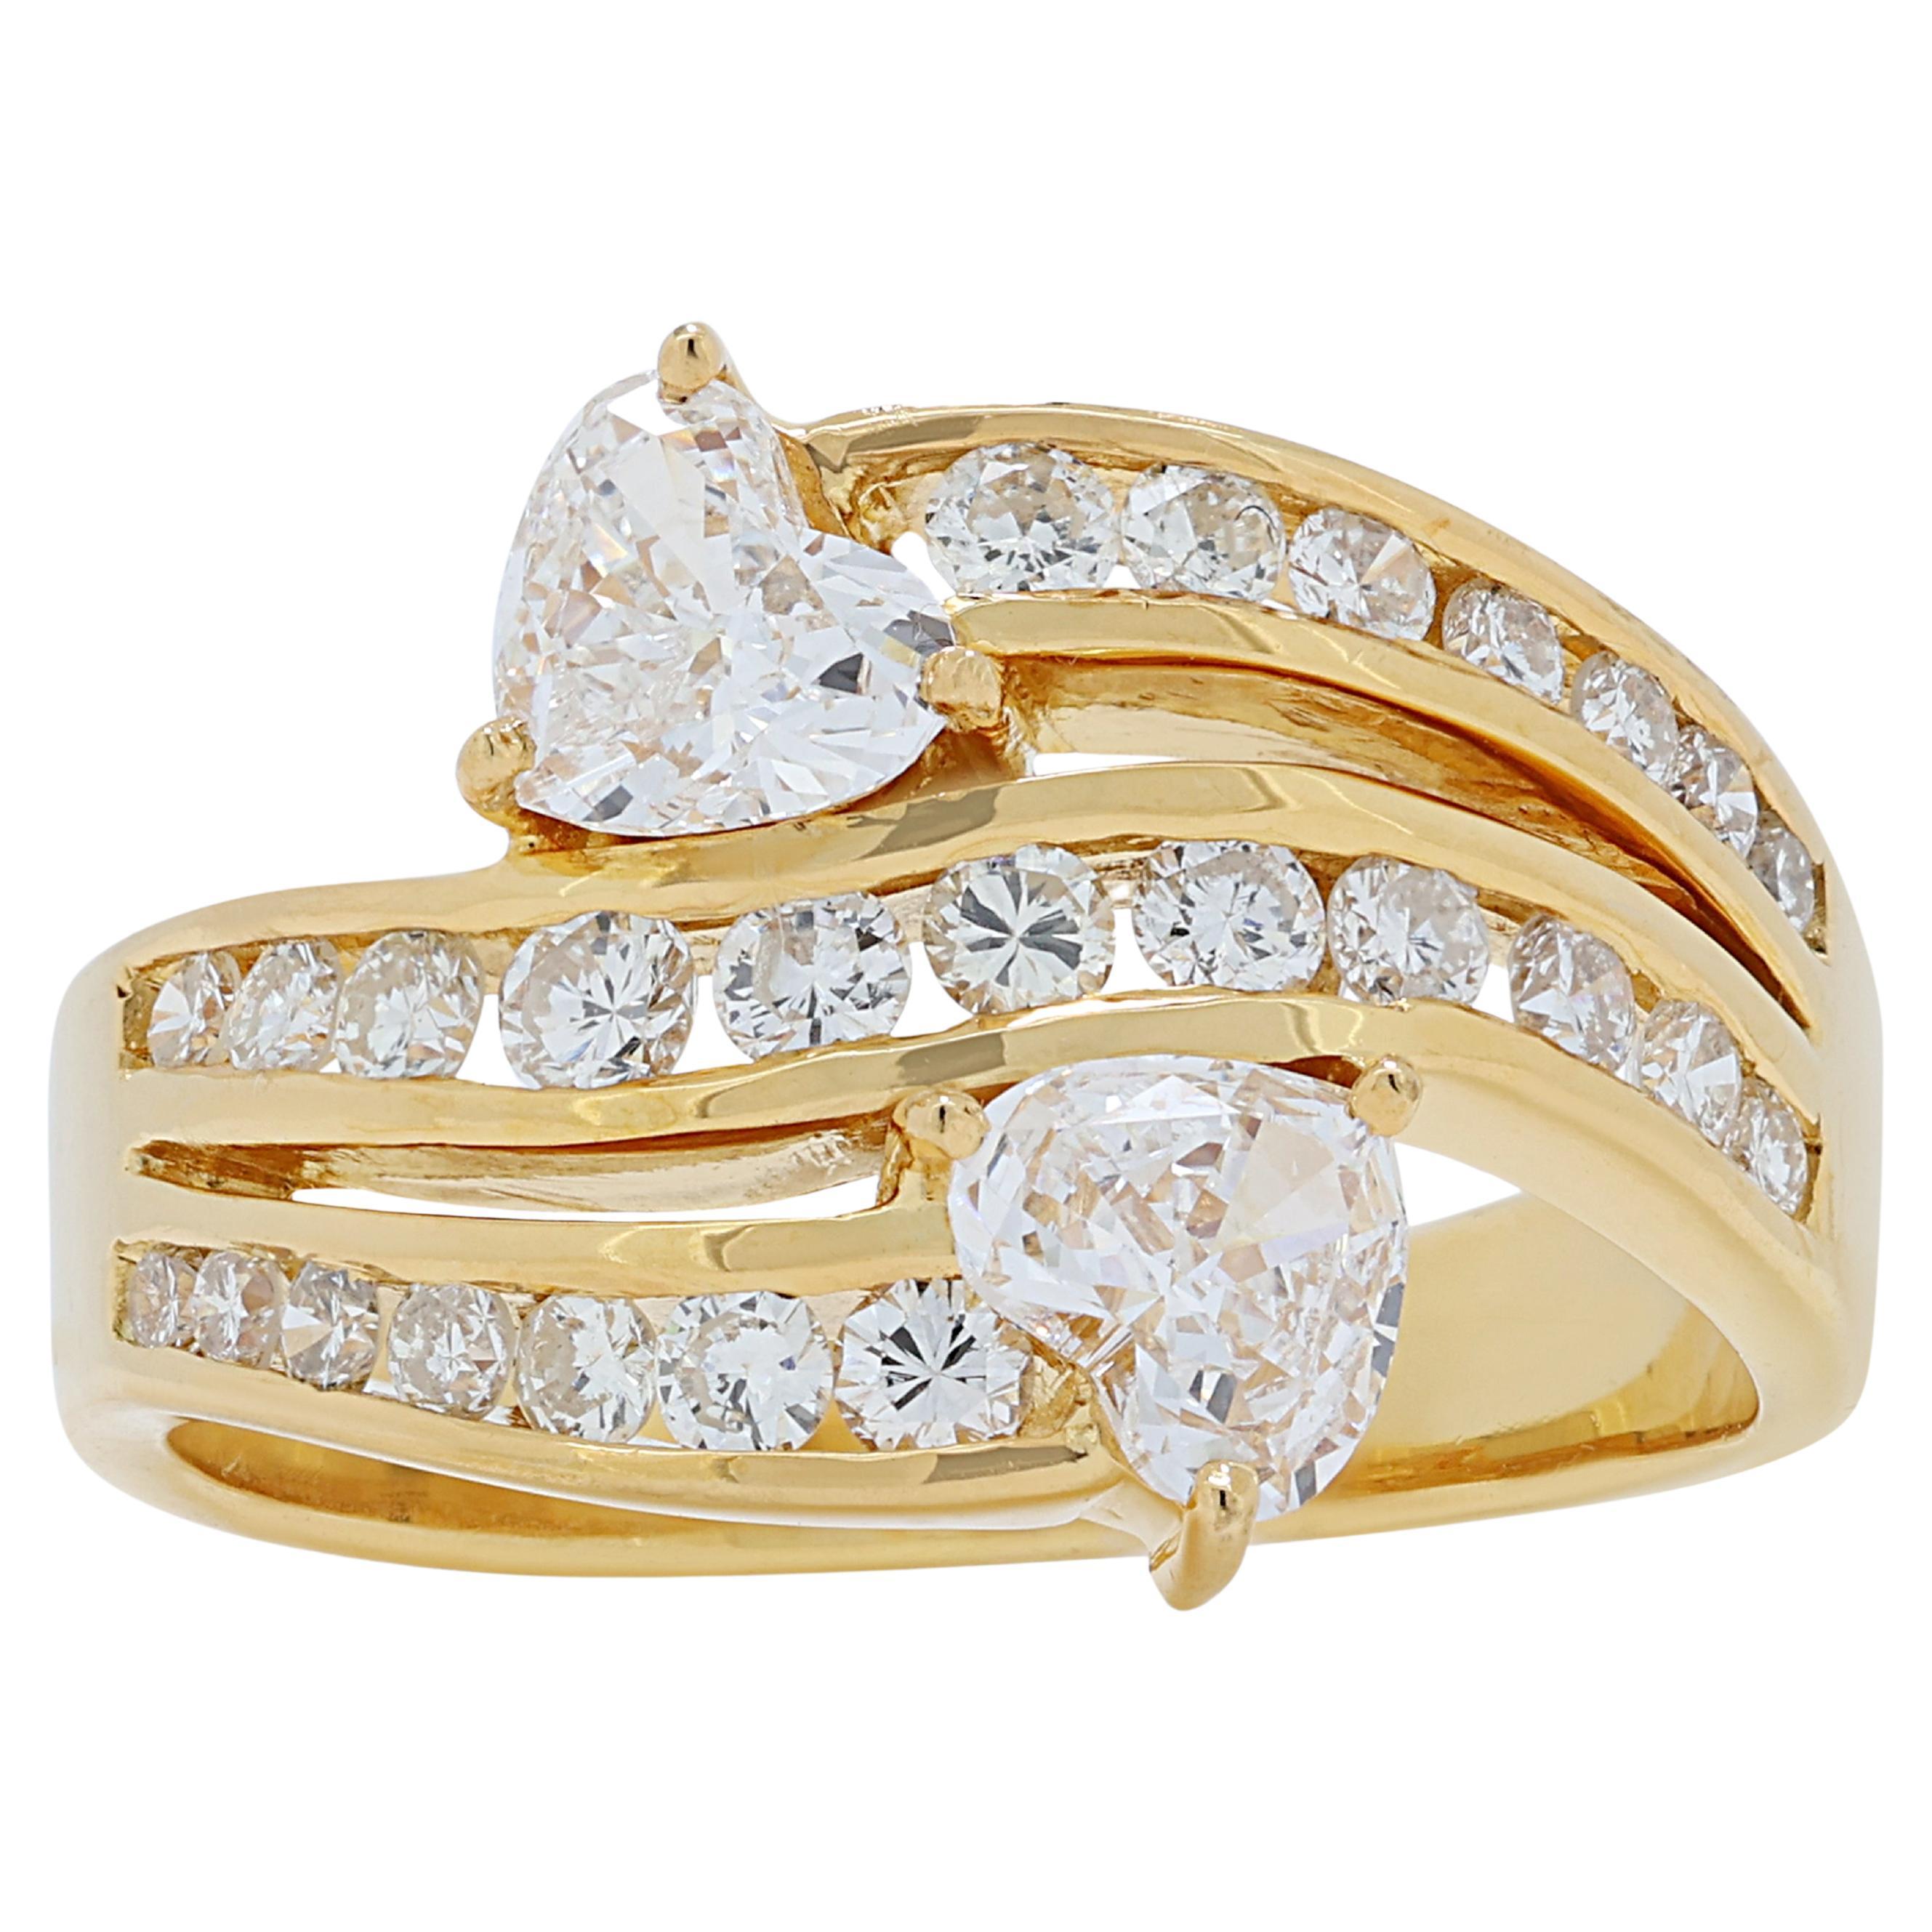 Sophisticated 1.12ct Heart-Shaped Diamonds Cluster Ring in 18k Yellow Gold